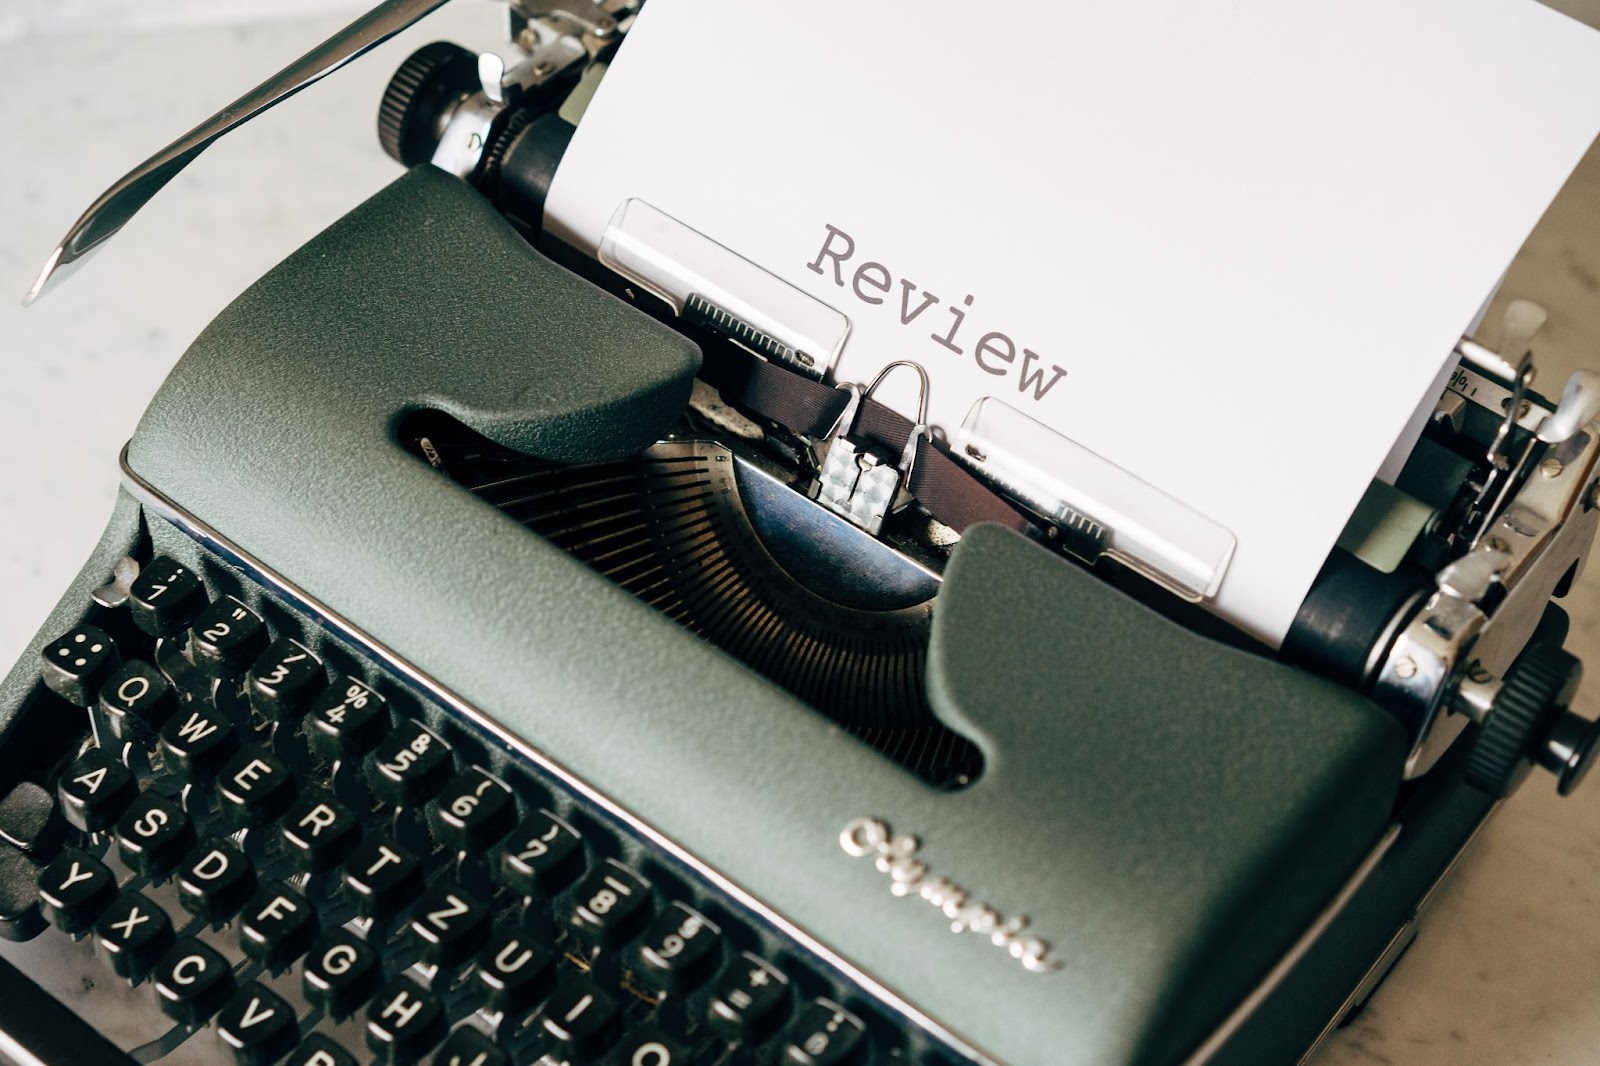 Writing a review on a typewriter